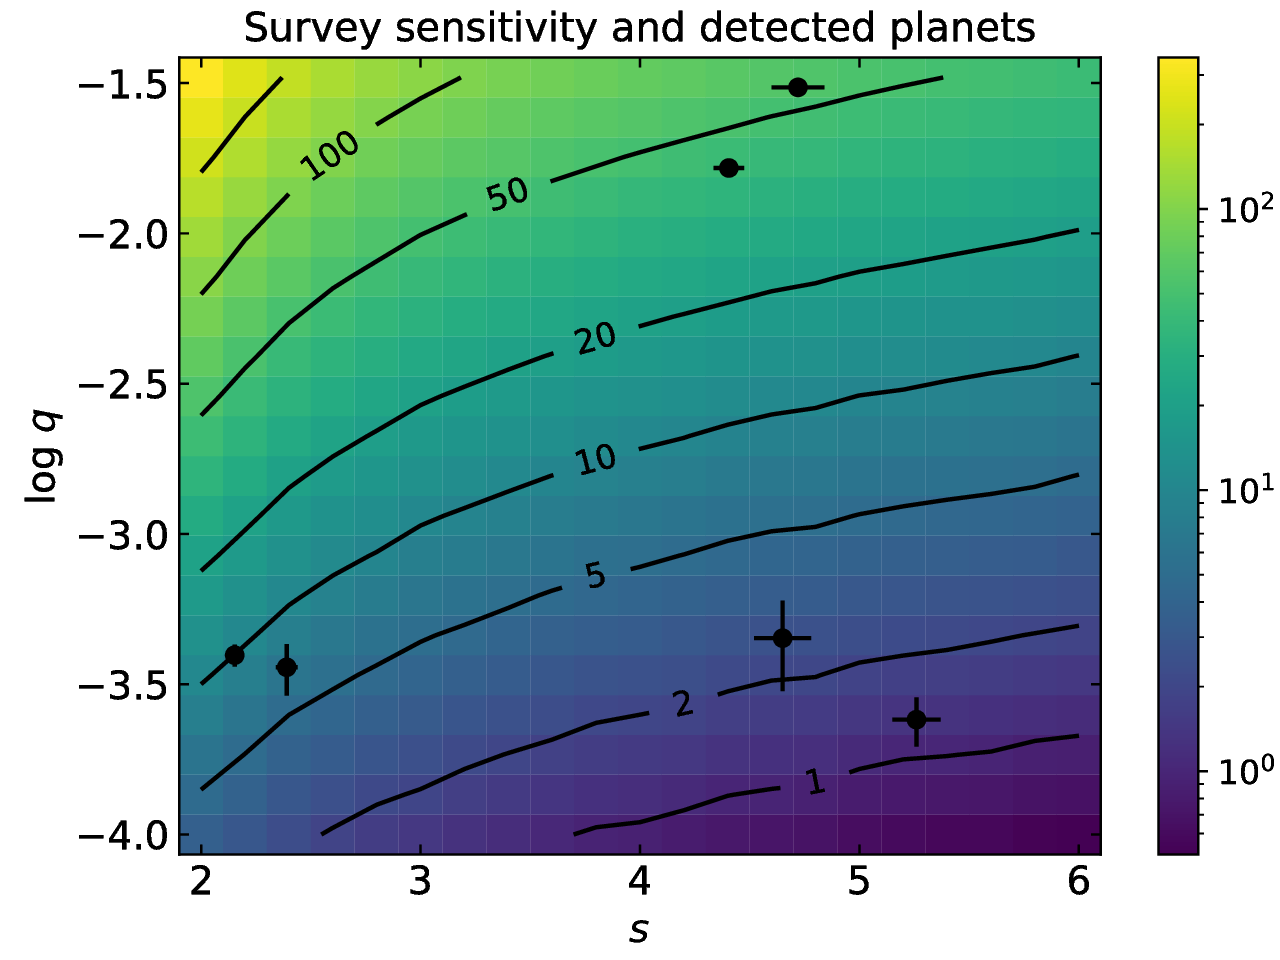 Survey detection efficiency and detected planets